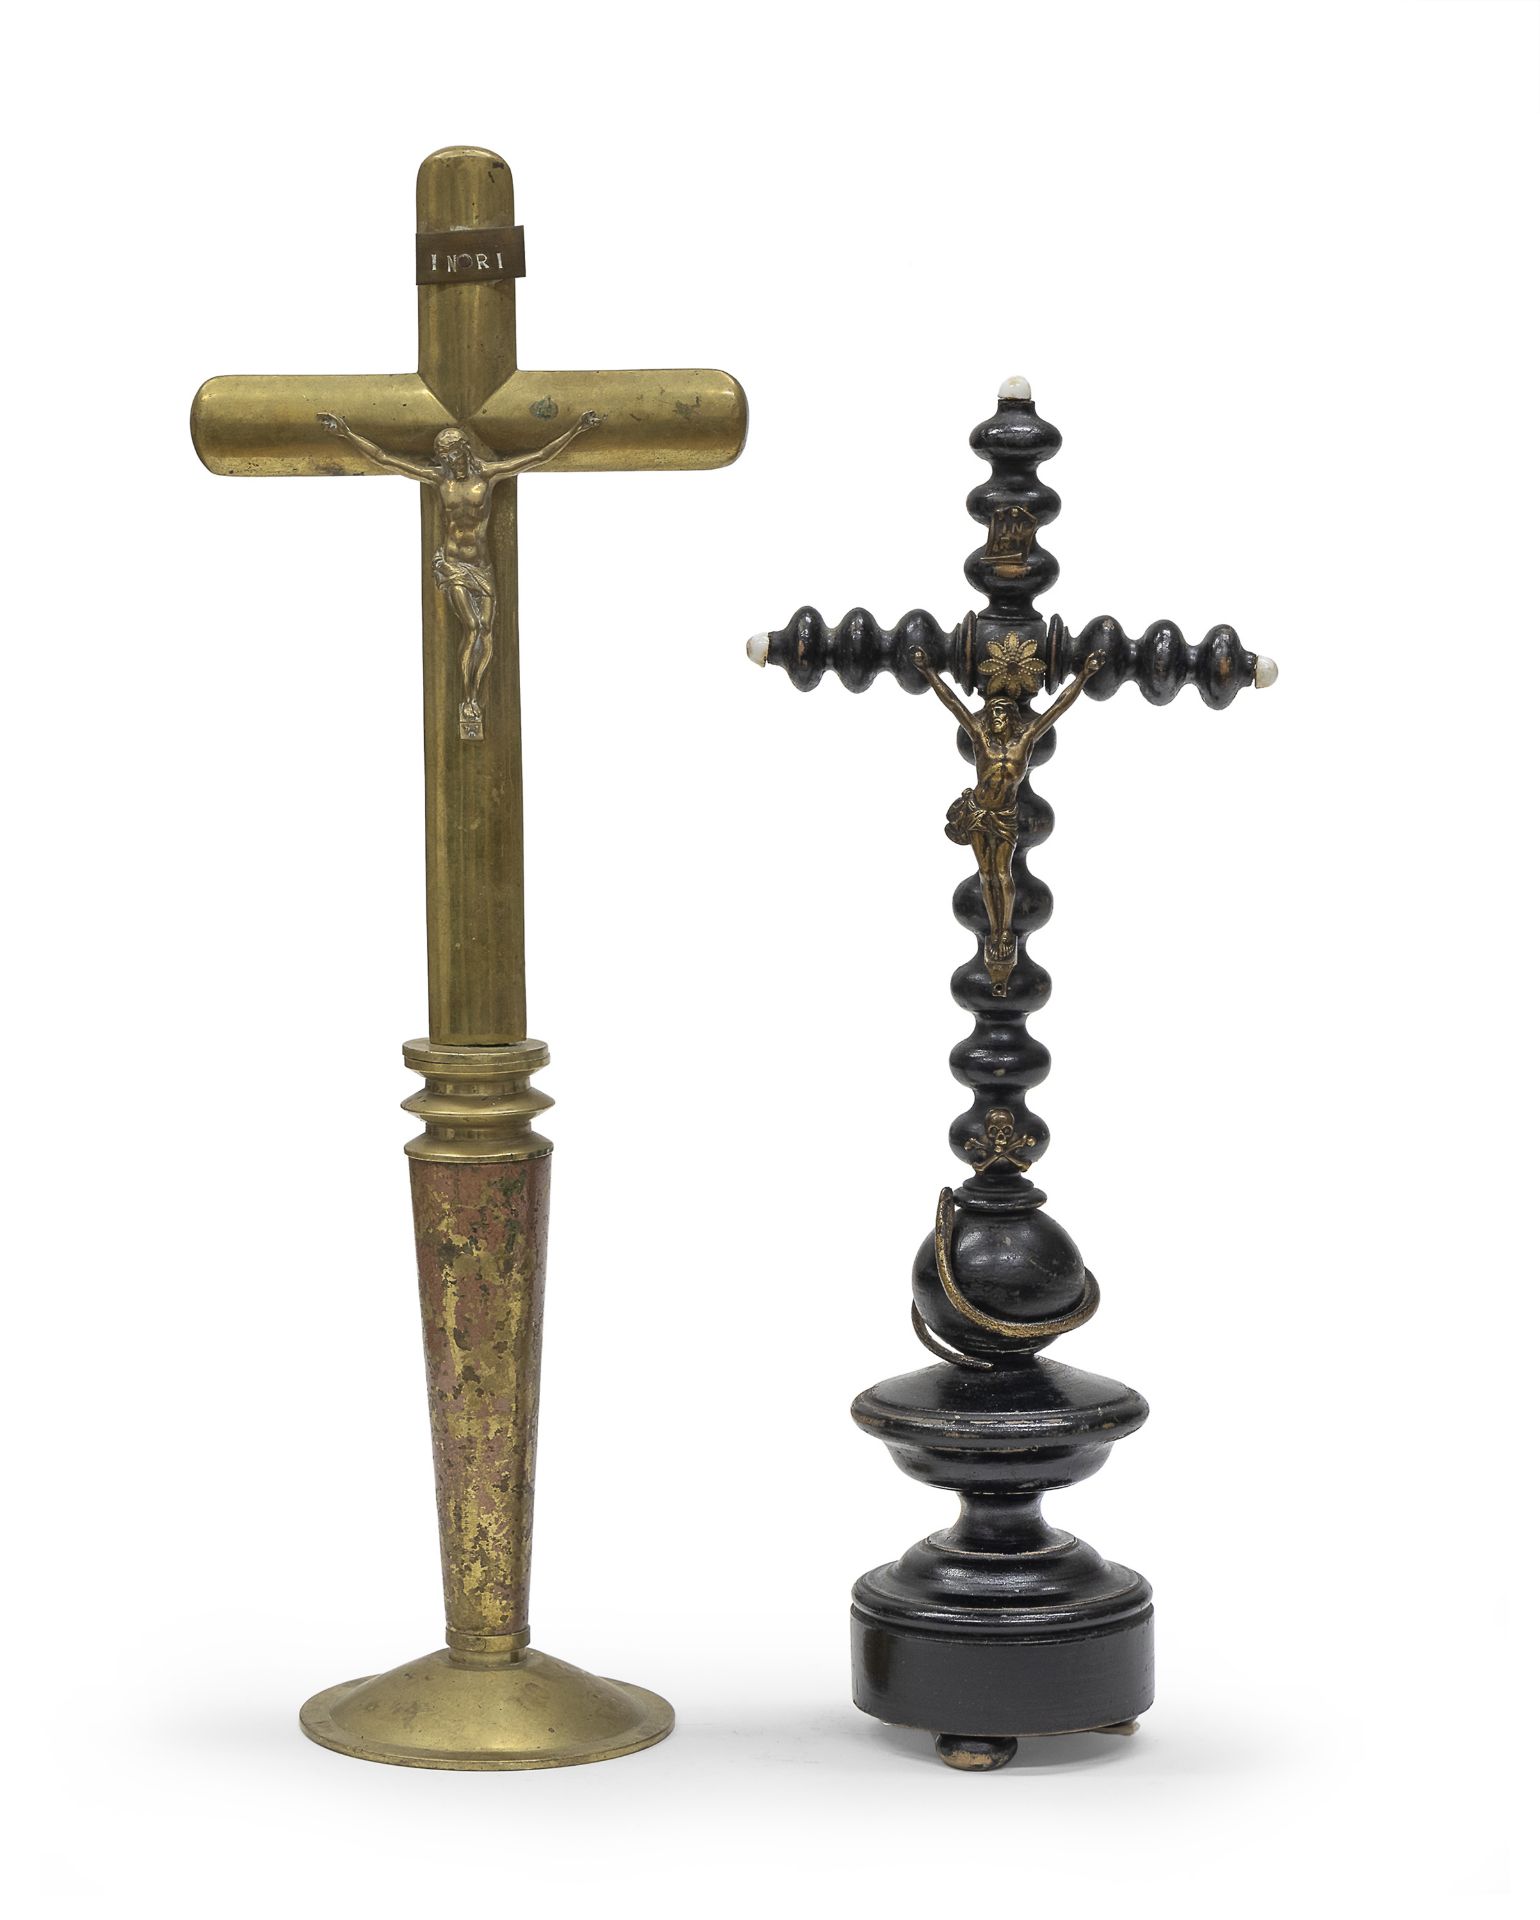 TWO CRUCIFIXES IN EBONIZED WOOD AND BRASS 19th - 20th CENTURY